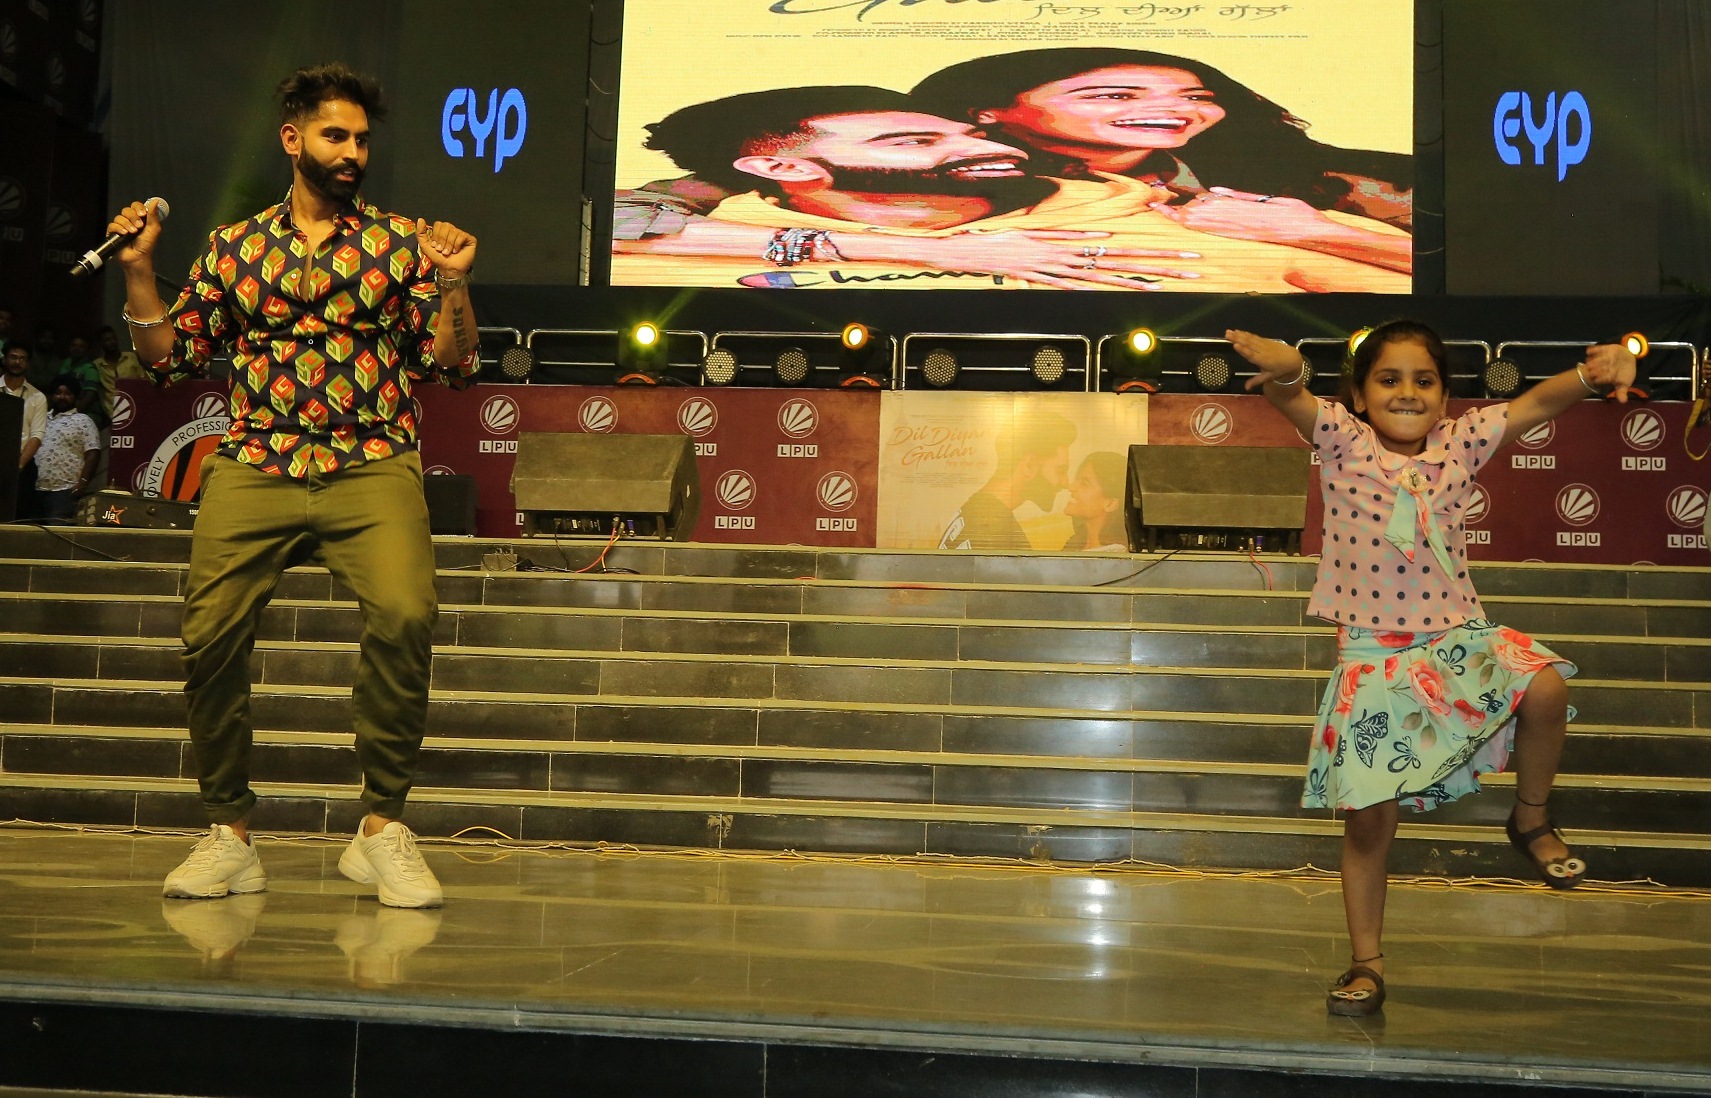 Students of LPU performing dance on the pollywood songs of Parmish Verma at Lovely Professional University campus (4)